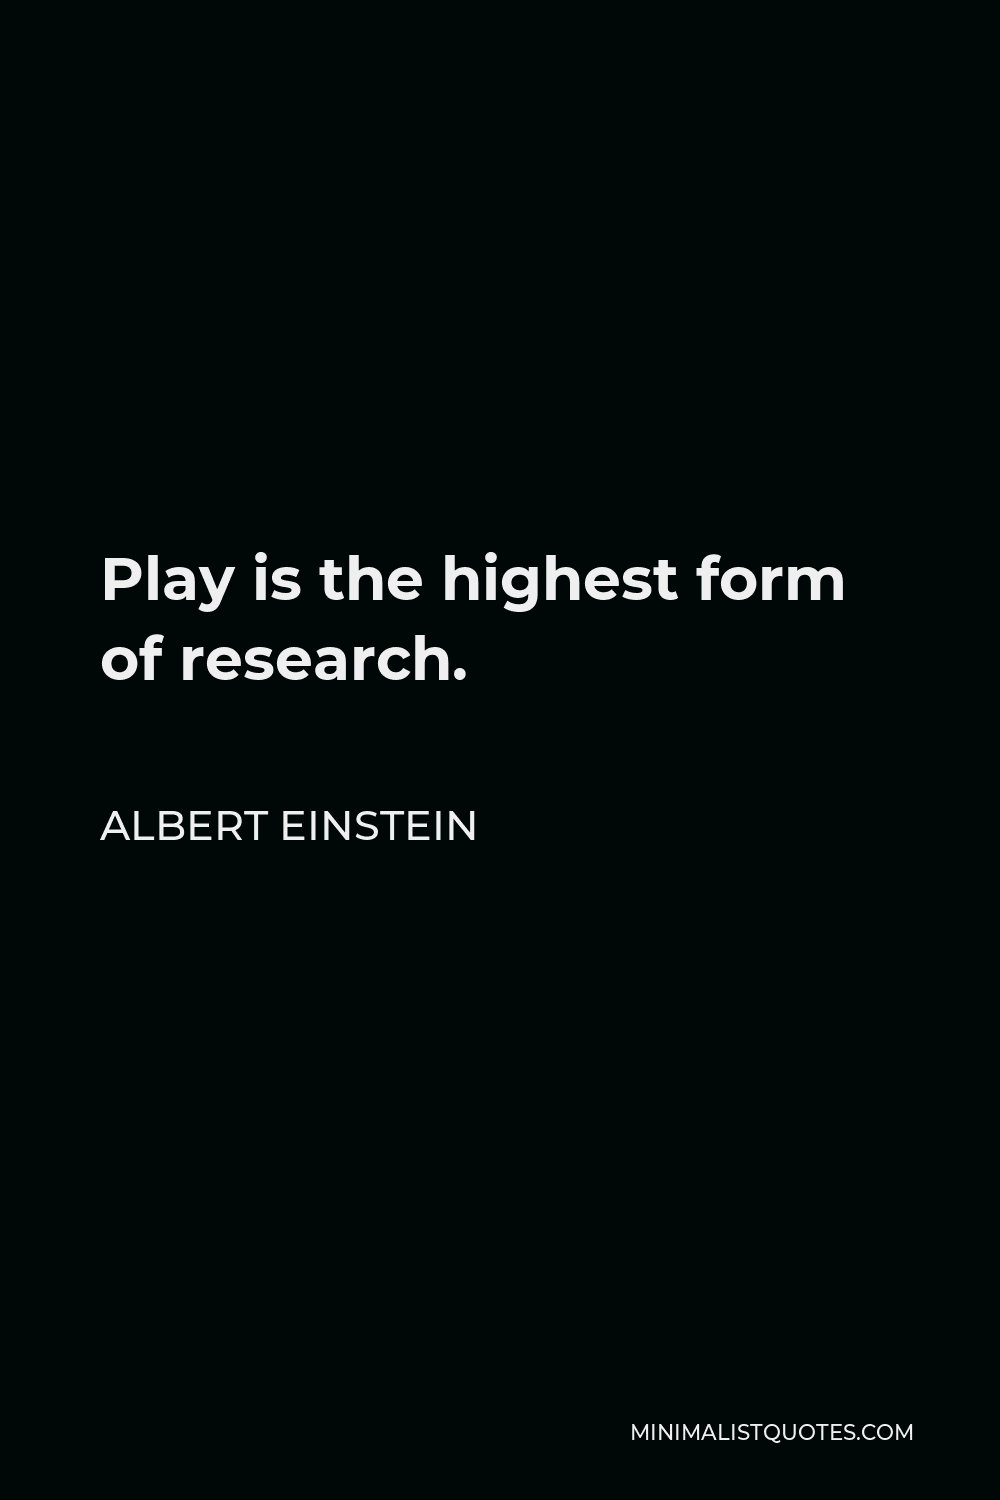 albert-einstein-quote-play-is-the-highest-form-of-research